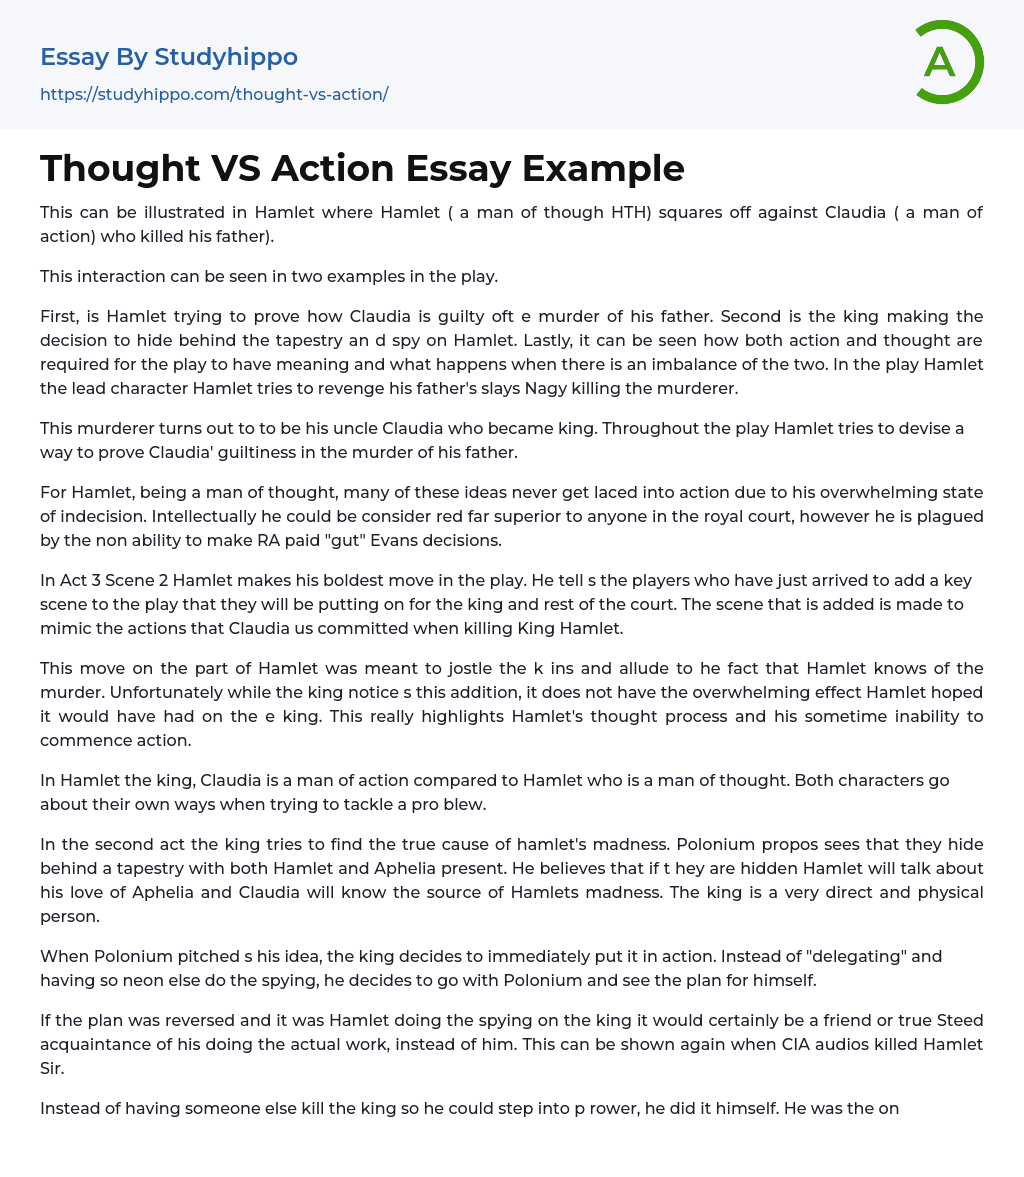 Thought VS Action Essay Example